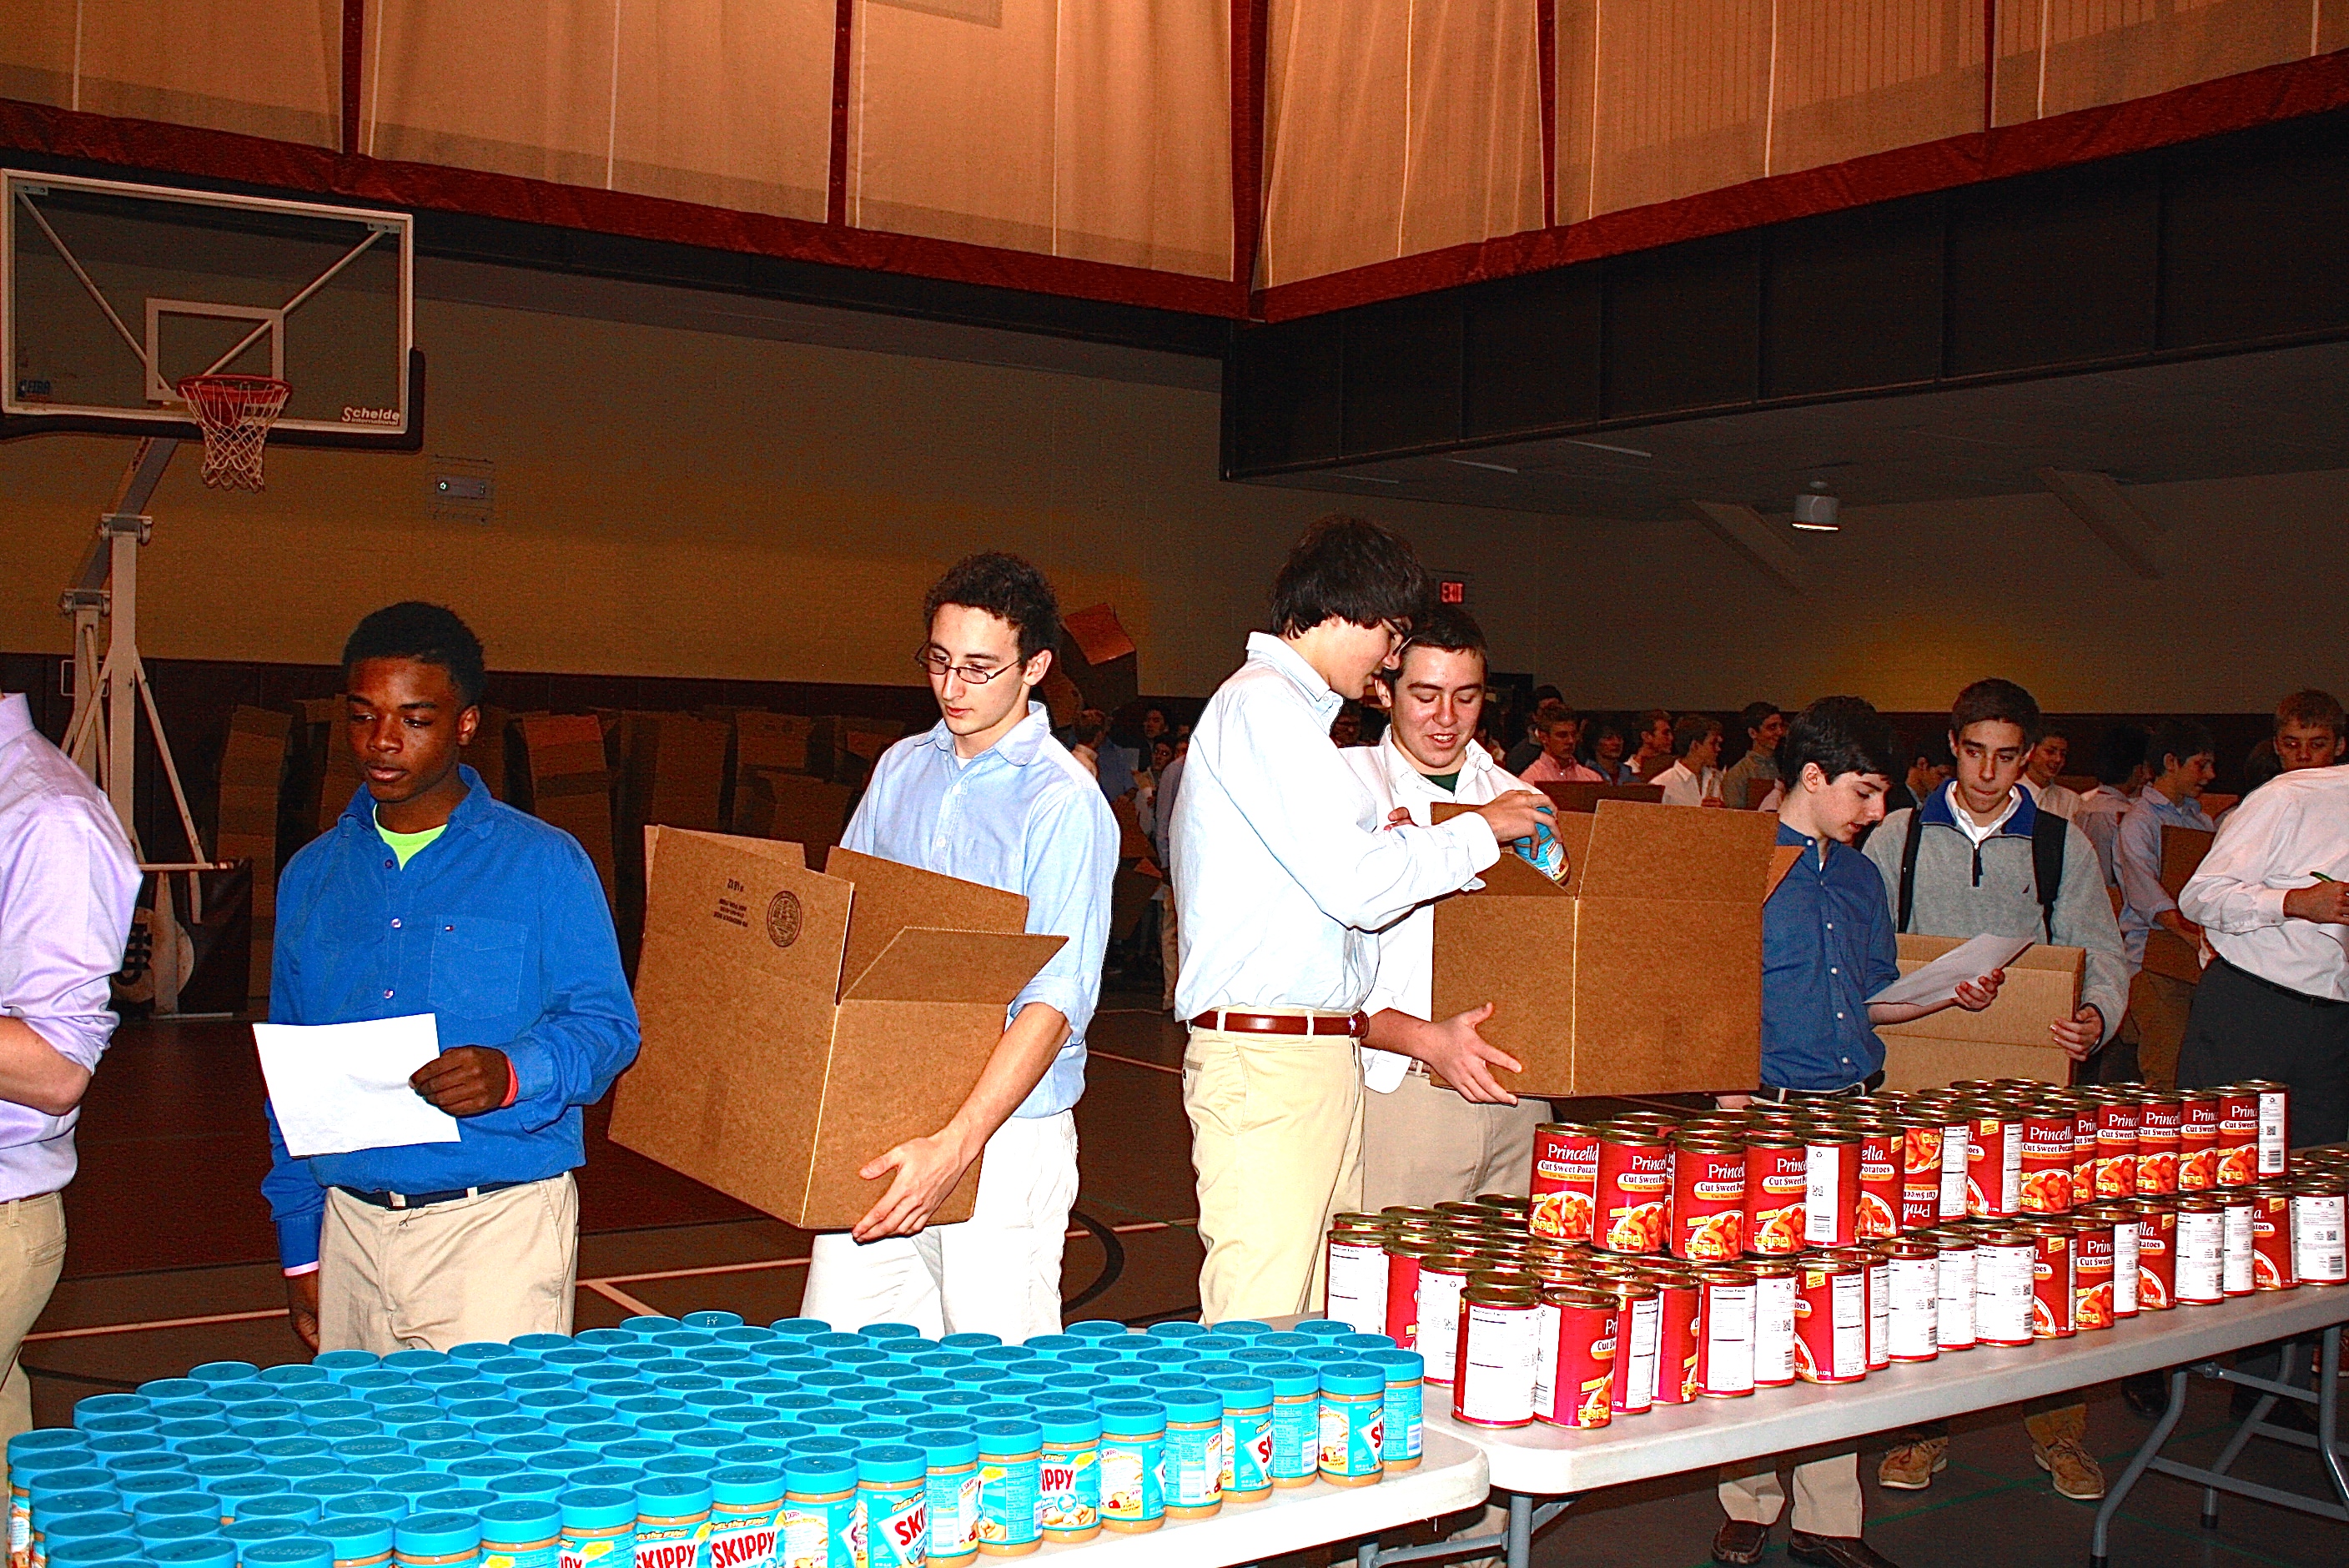 Students at Cleveland's University School packed Thanksgiving food boxes for 240 Cleveland families.